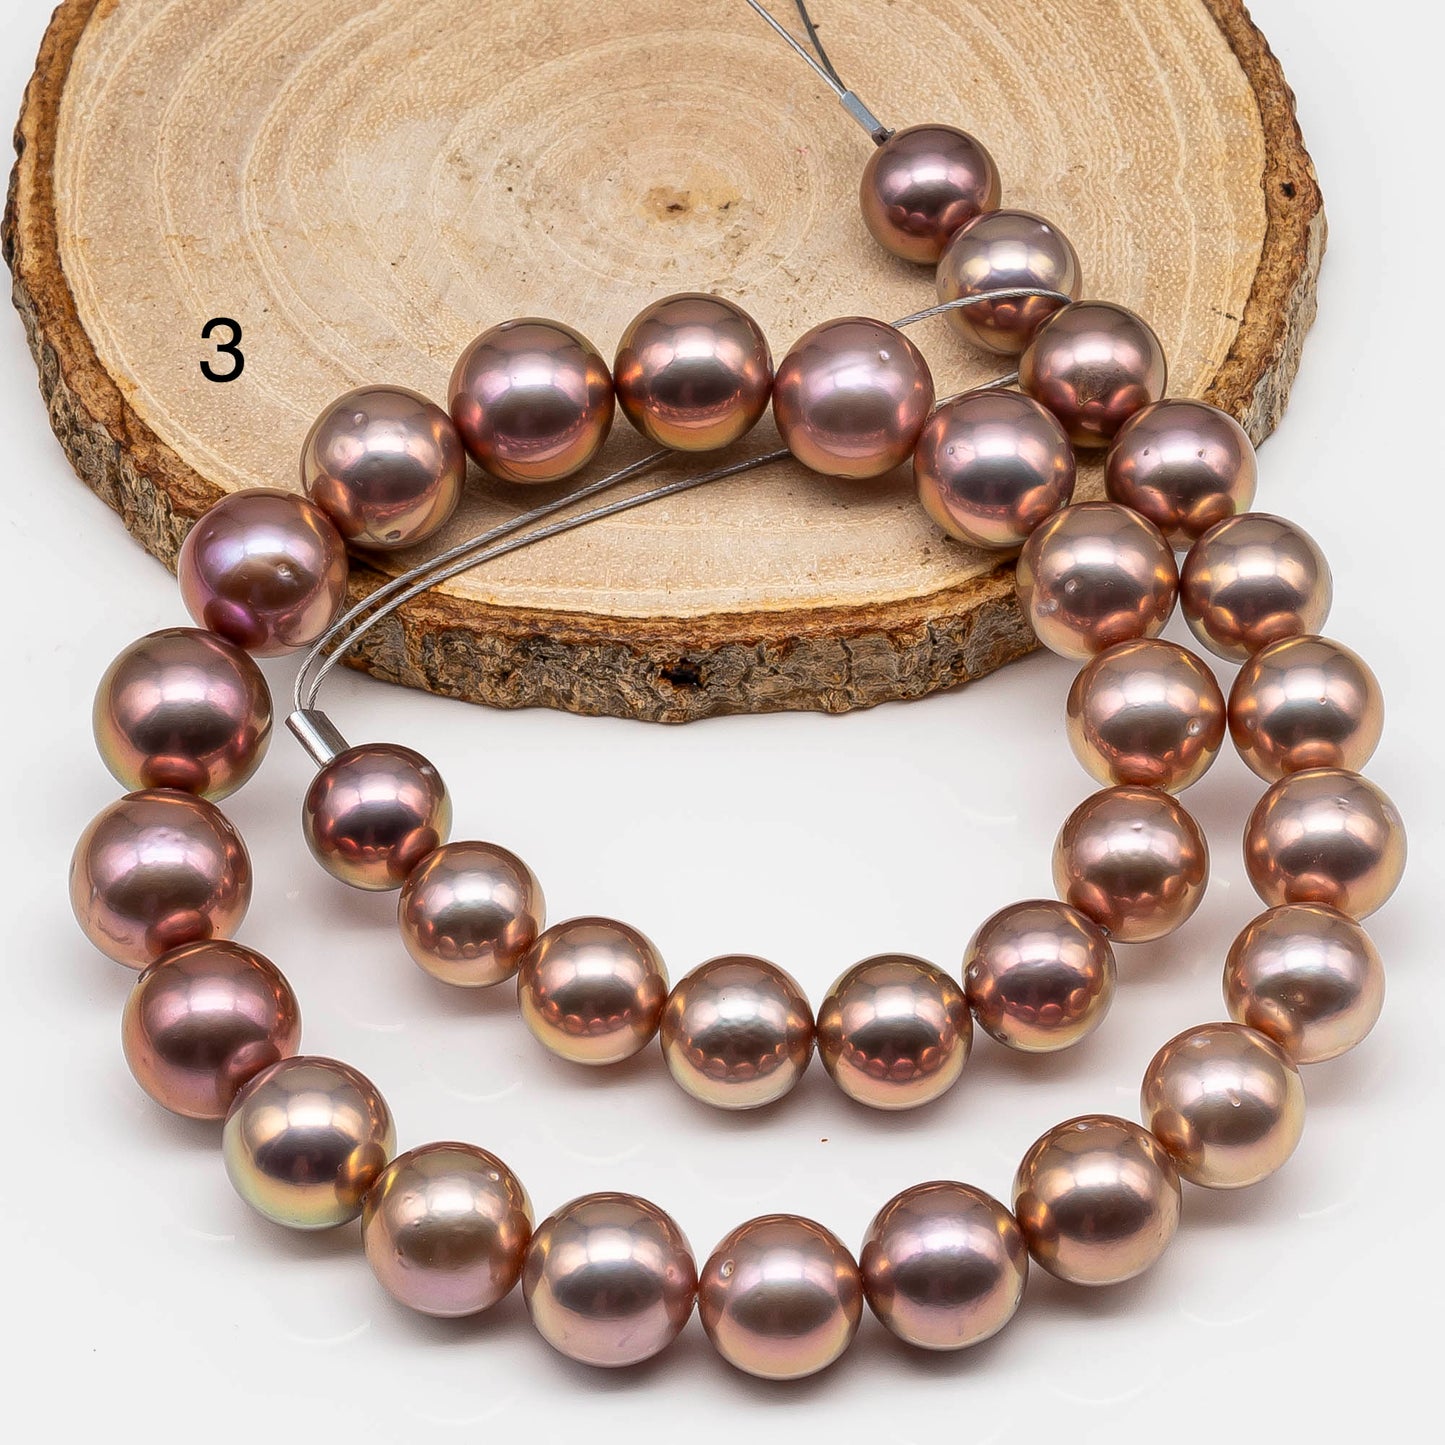 11-14mm Round Edison Pearl Bead Natural Pink Color with Gold Overtones, Super High Luster with Blemishes for Jewelry Making, SKU # 1668EP